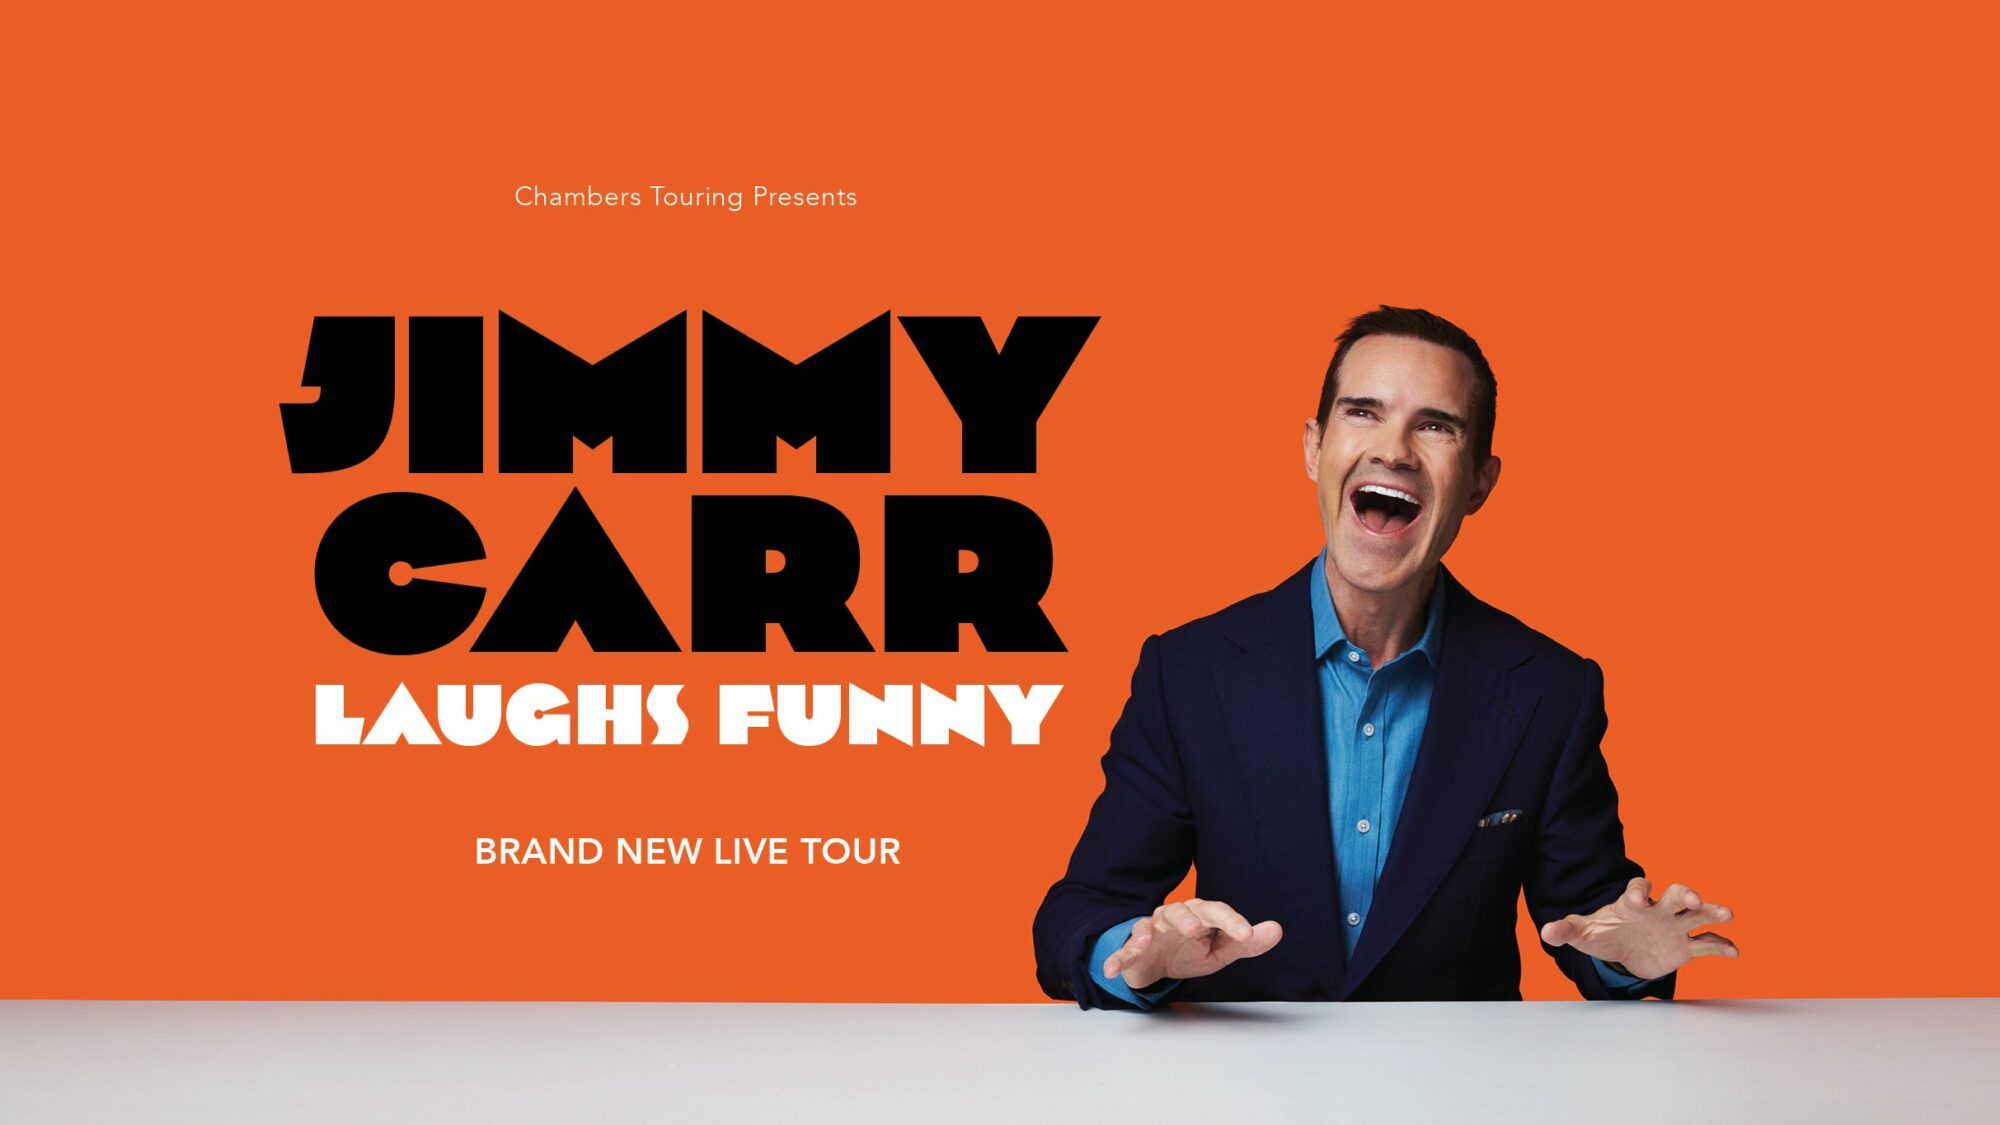 Image name Jimmy Carr Laughs Funny at York Barbican York the 19 image from the post Jimmy Carr: Laughs Funny at Victoria Theatre, Halifax in Yorkshire.com.